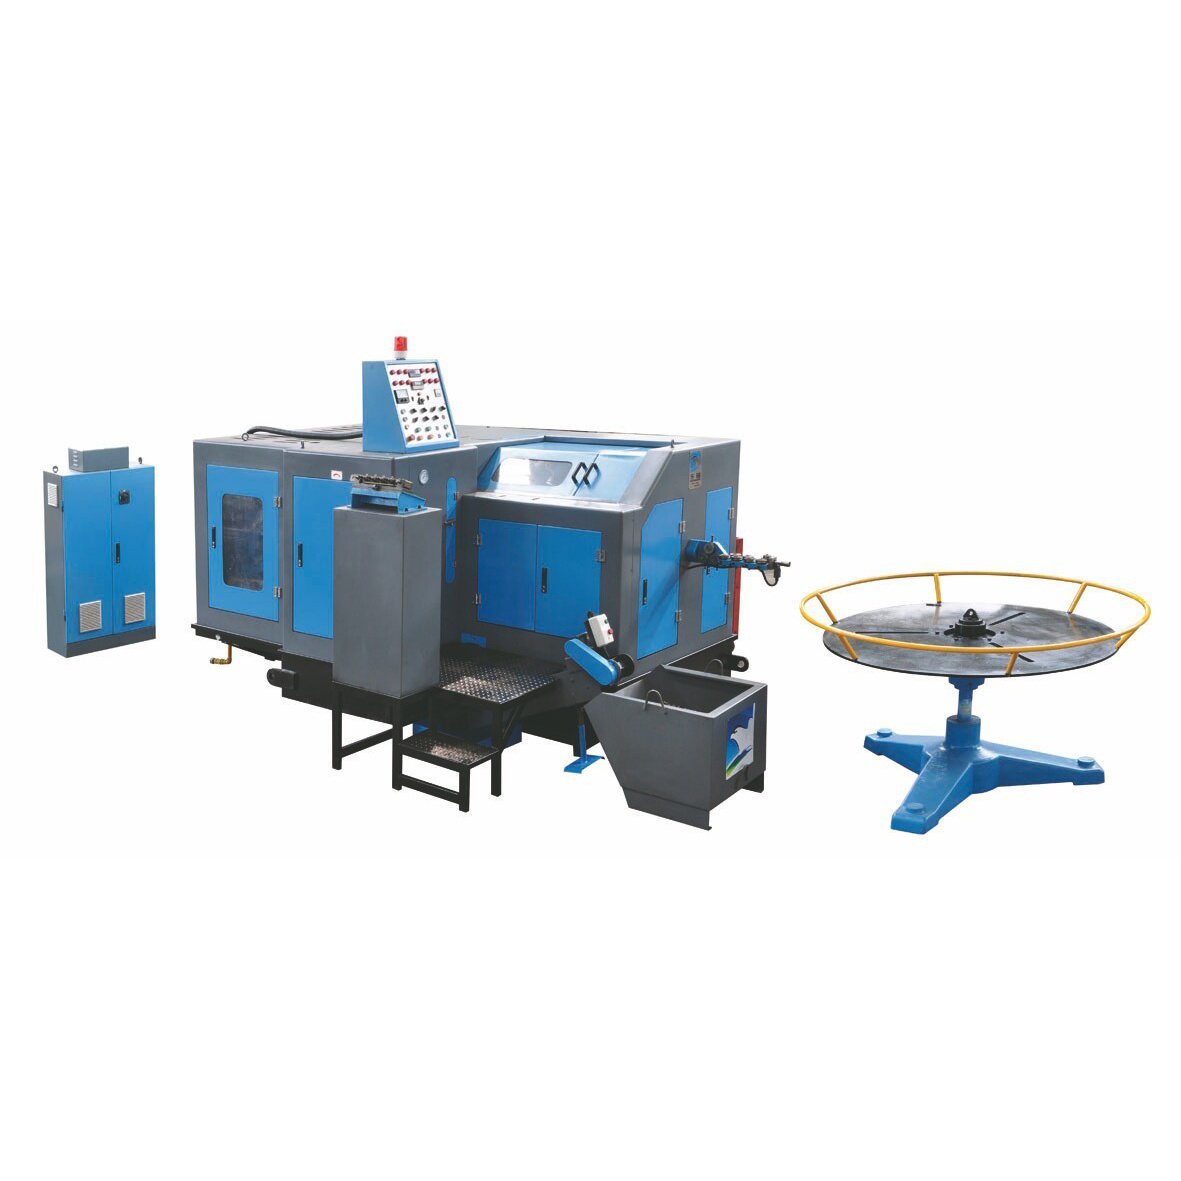 DBF-64S multi-station cold heading forming machine